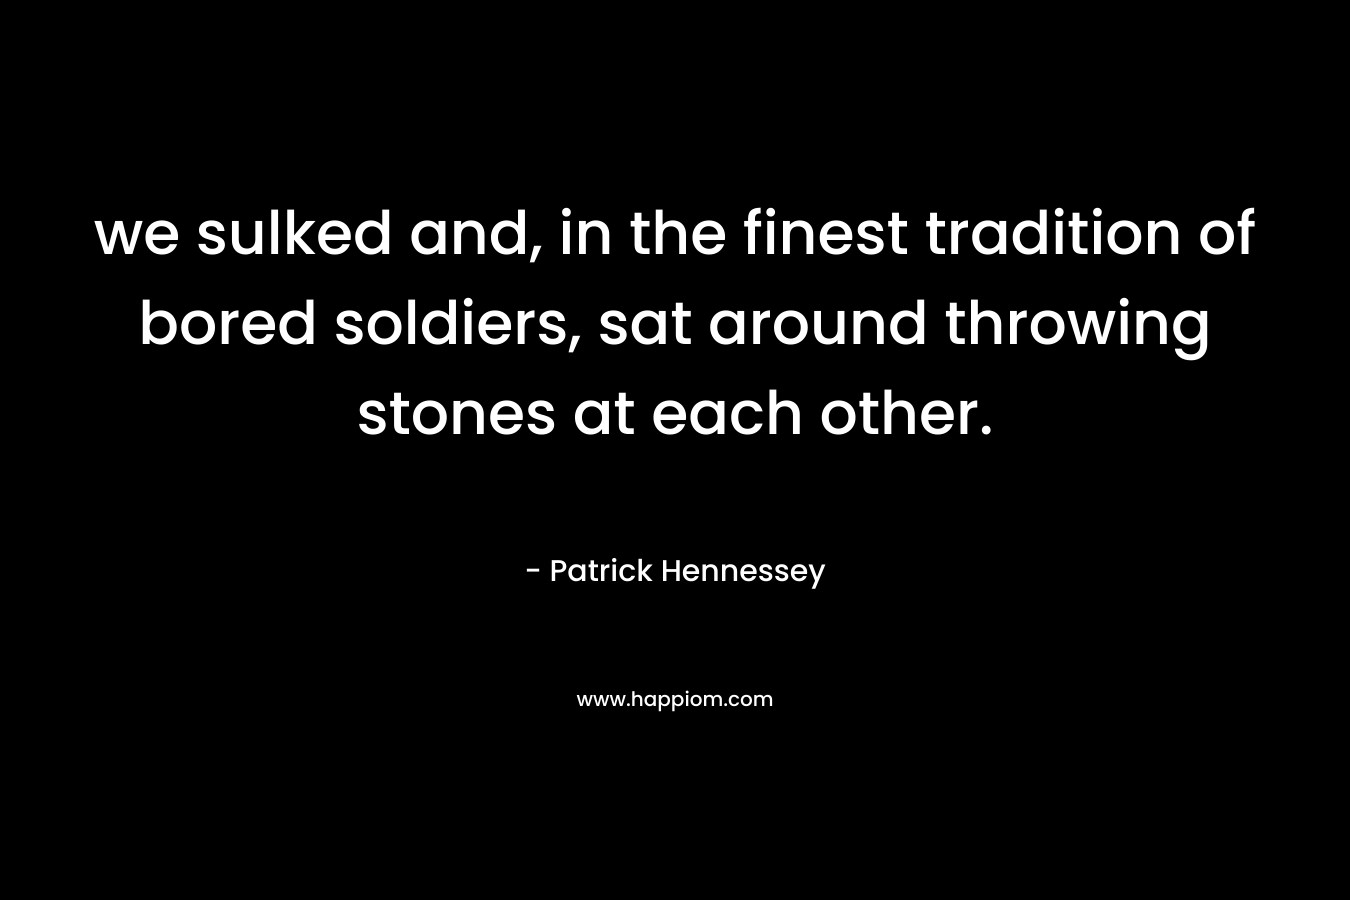 we sulked and, in the finest tradition of bored soldiers, sat around throwing stones at each other. – Patrick Hennessey